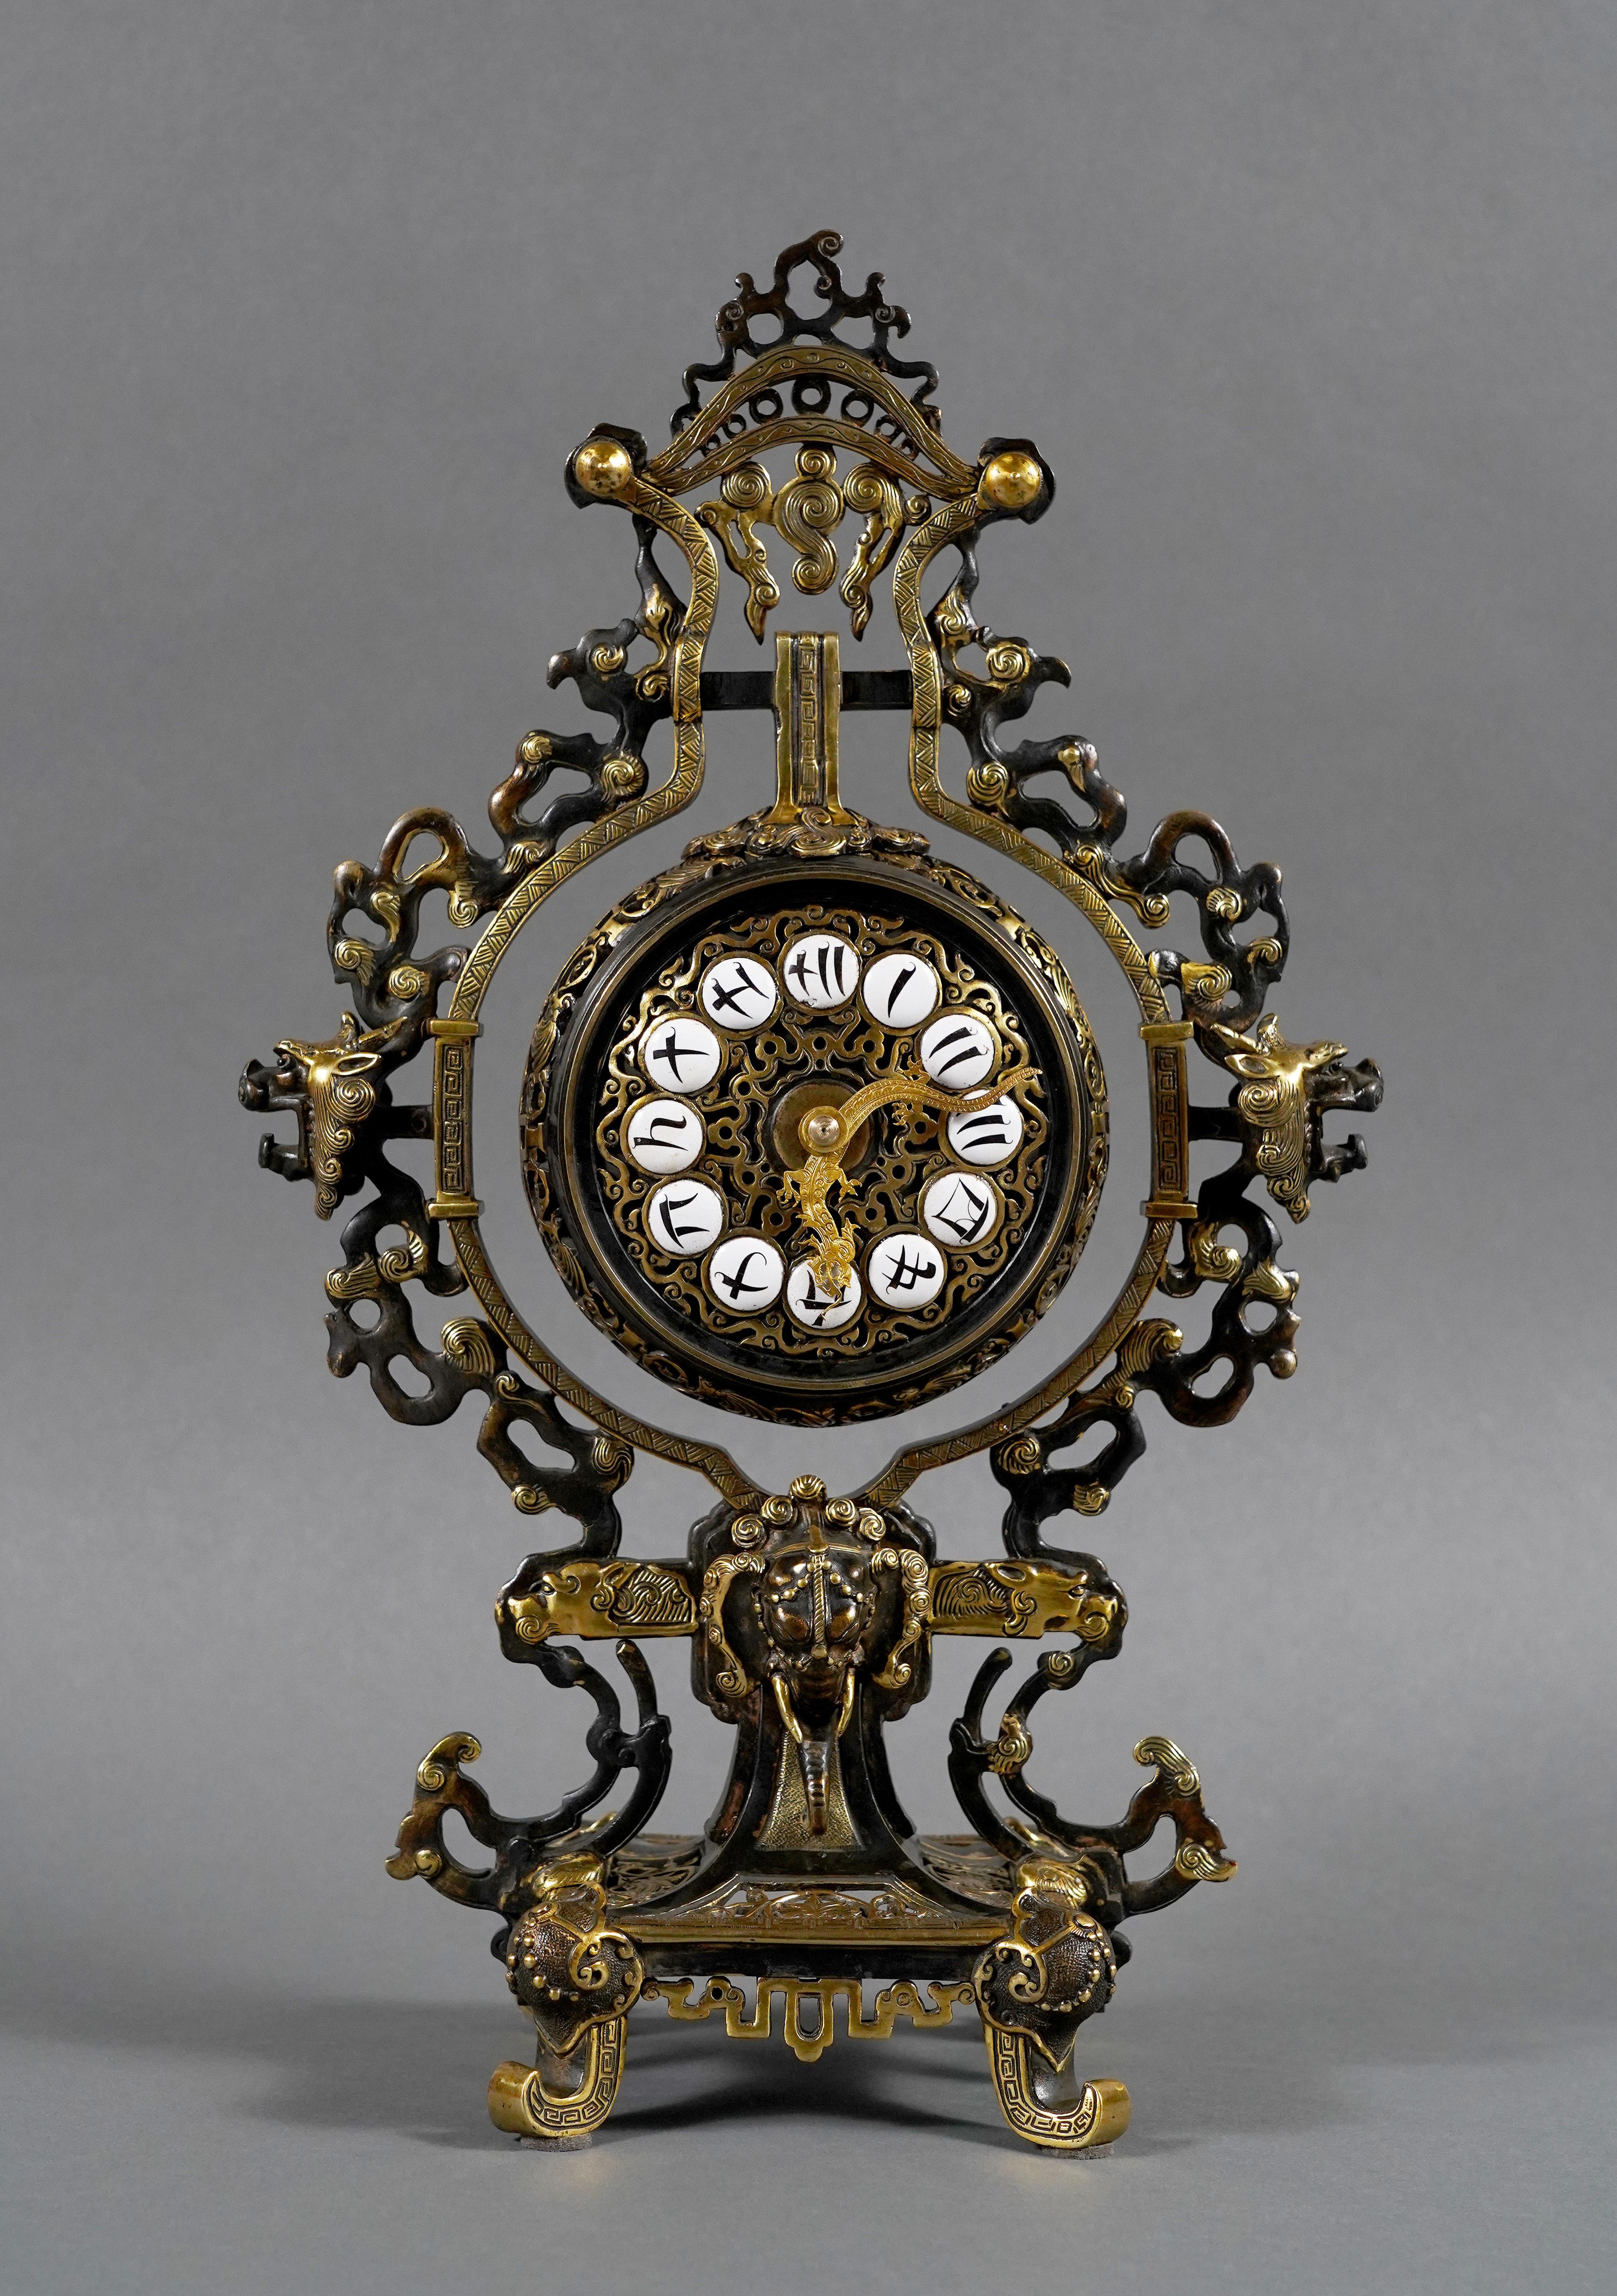 Rare Japanese clock in double patina bronze with suspended dial.
The portico and dial, with calligraphic Kanji numerals complemented by hands featuring an undulating dragon, are decorated with clouds with dragon heads and sacred pearls.
The whole is